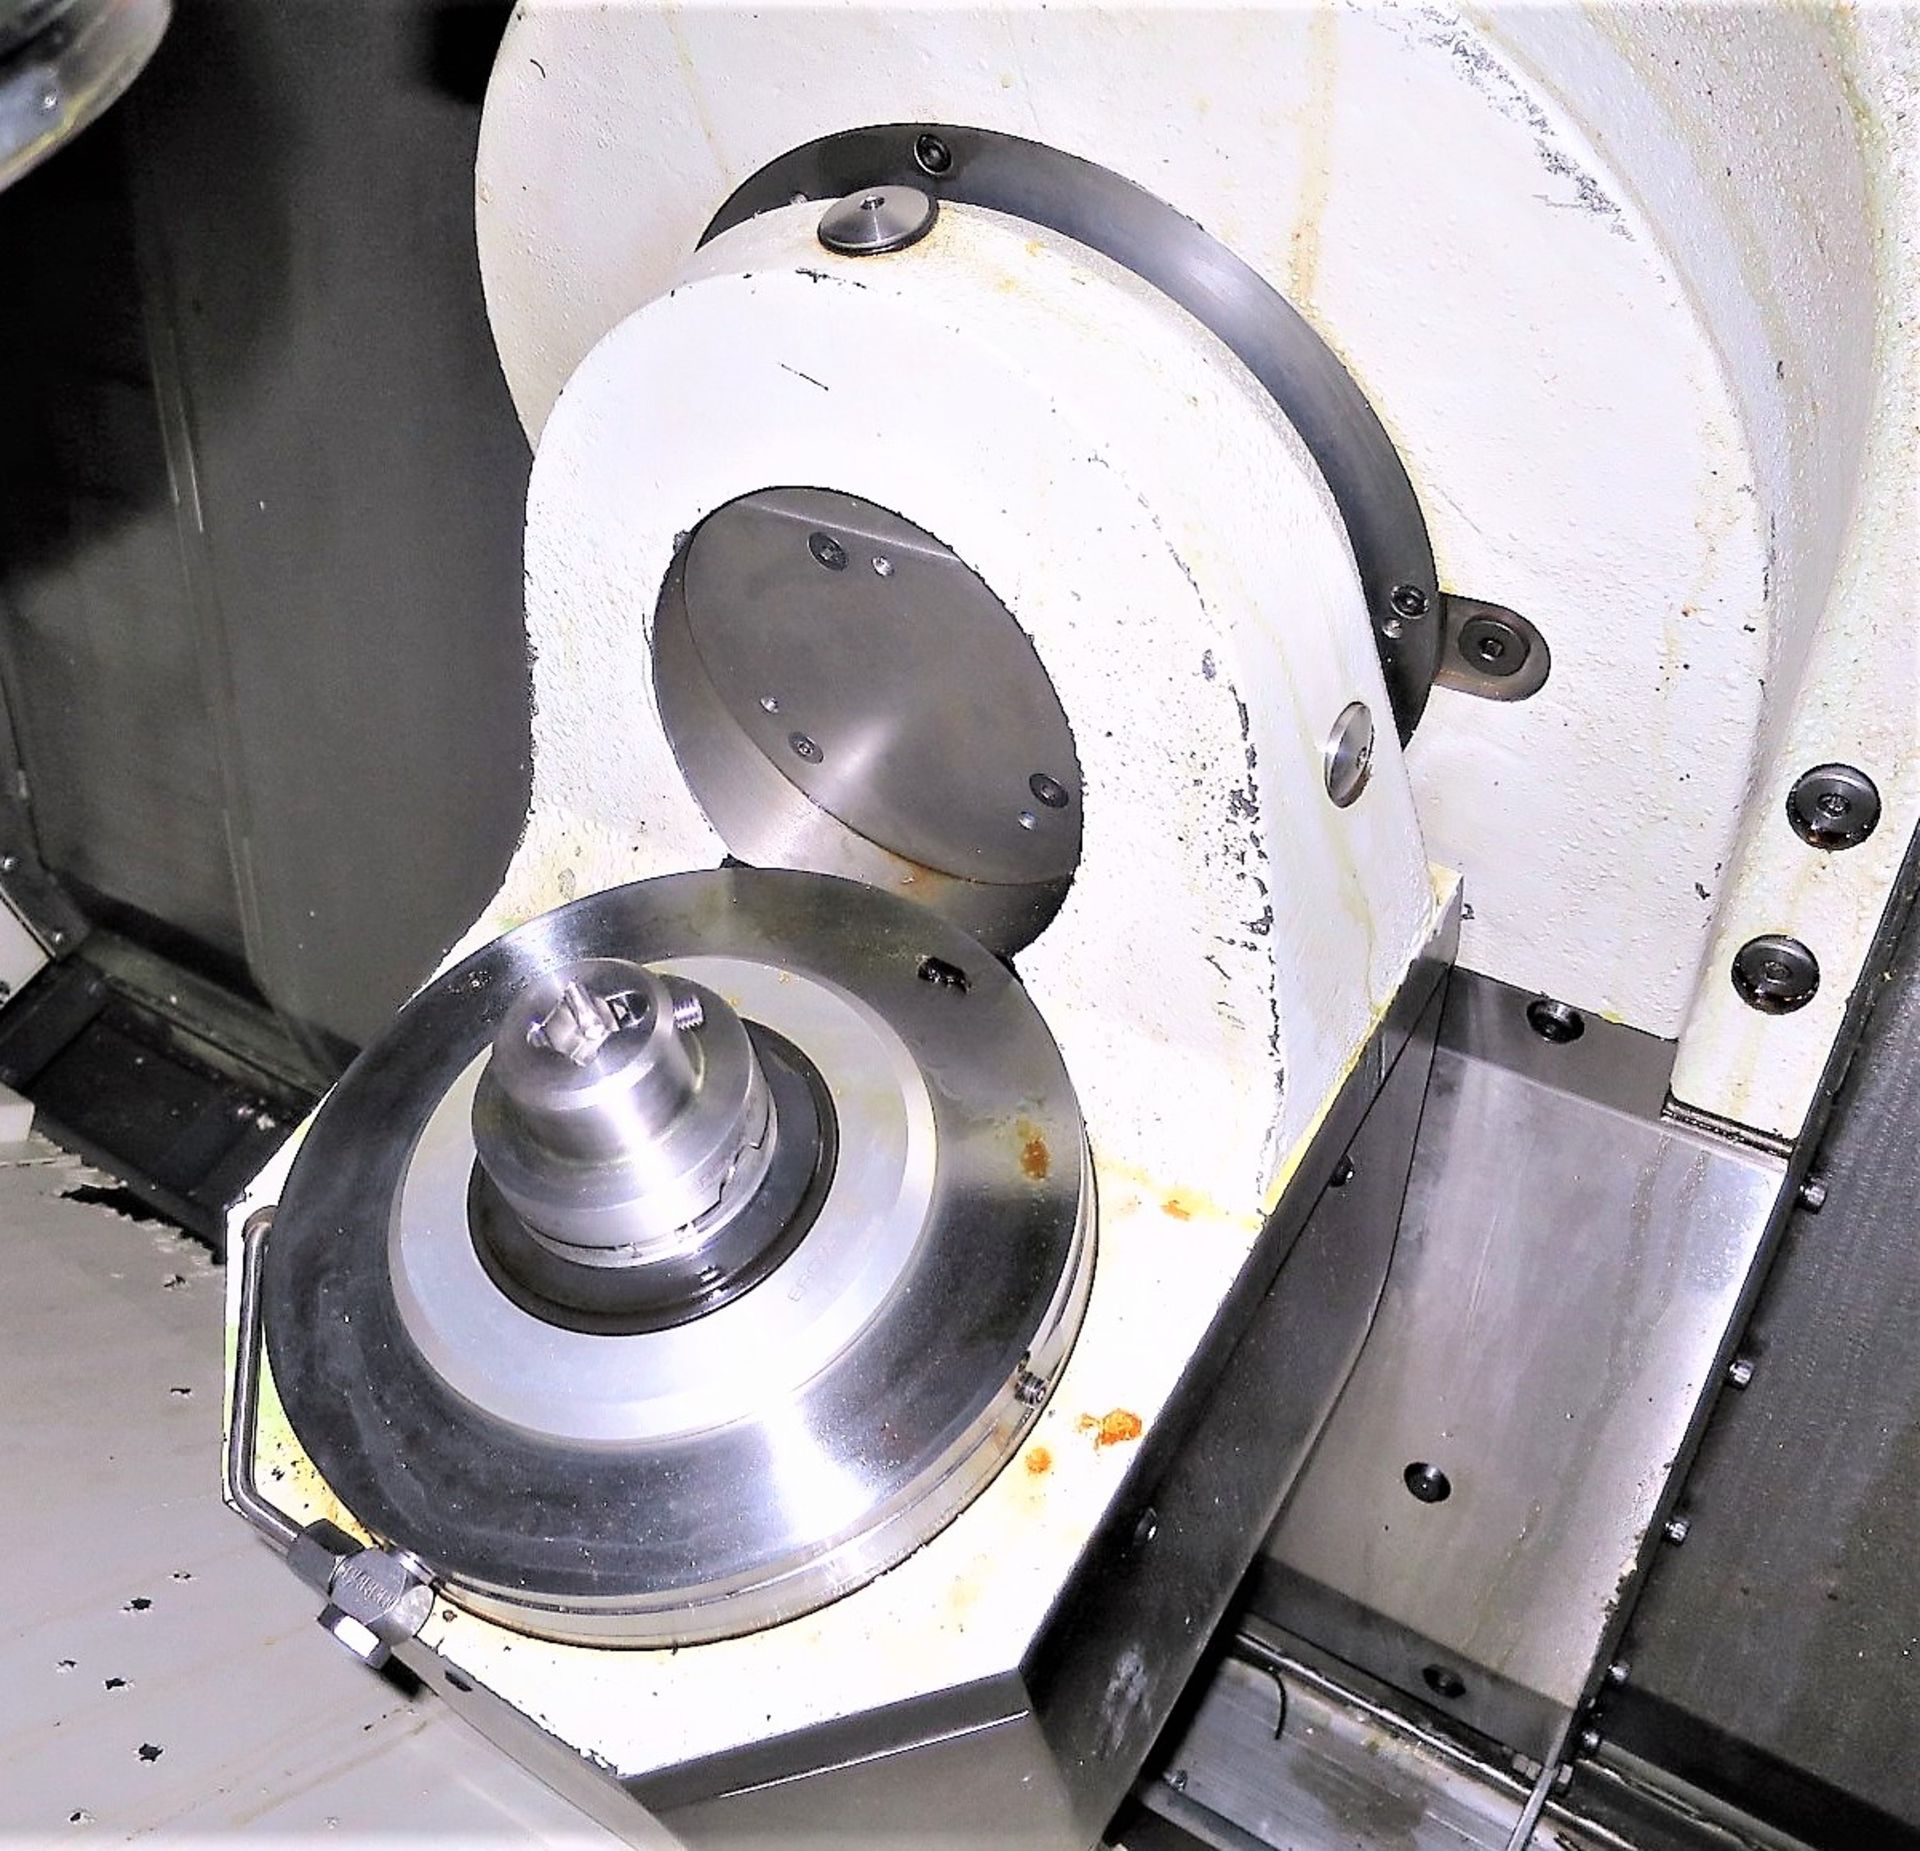 Mikron HSM-400U High Speed 5-Axis CNC Vertical Machining Center, S/N 107.87.00.108 (42,000 RPM) - Image 4 of 8